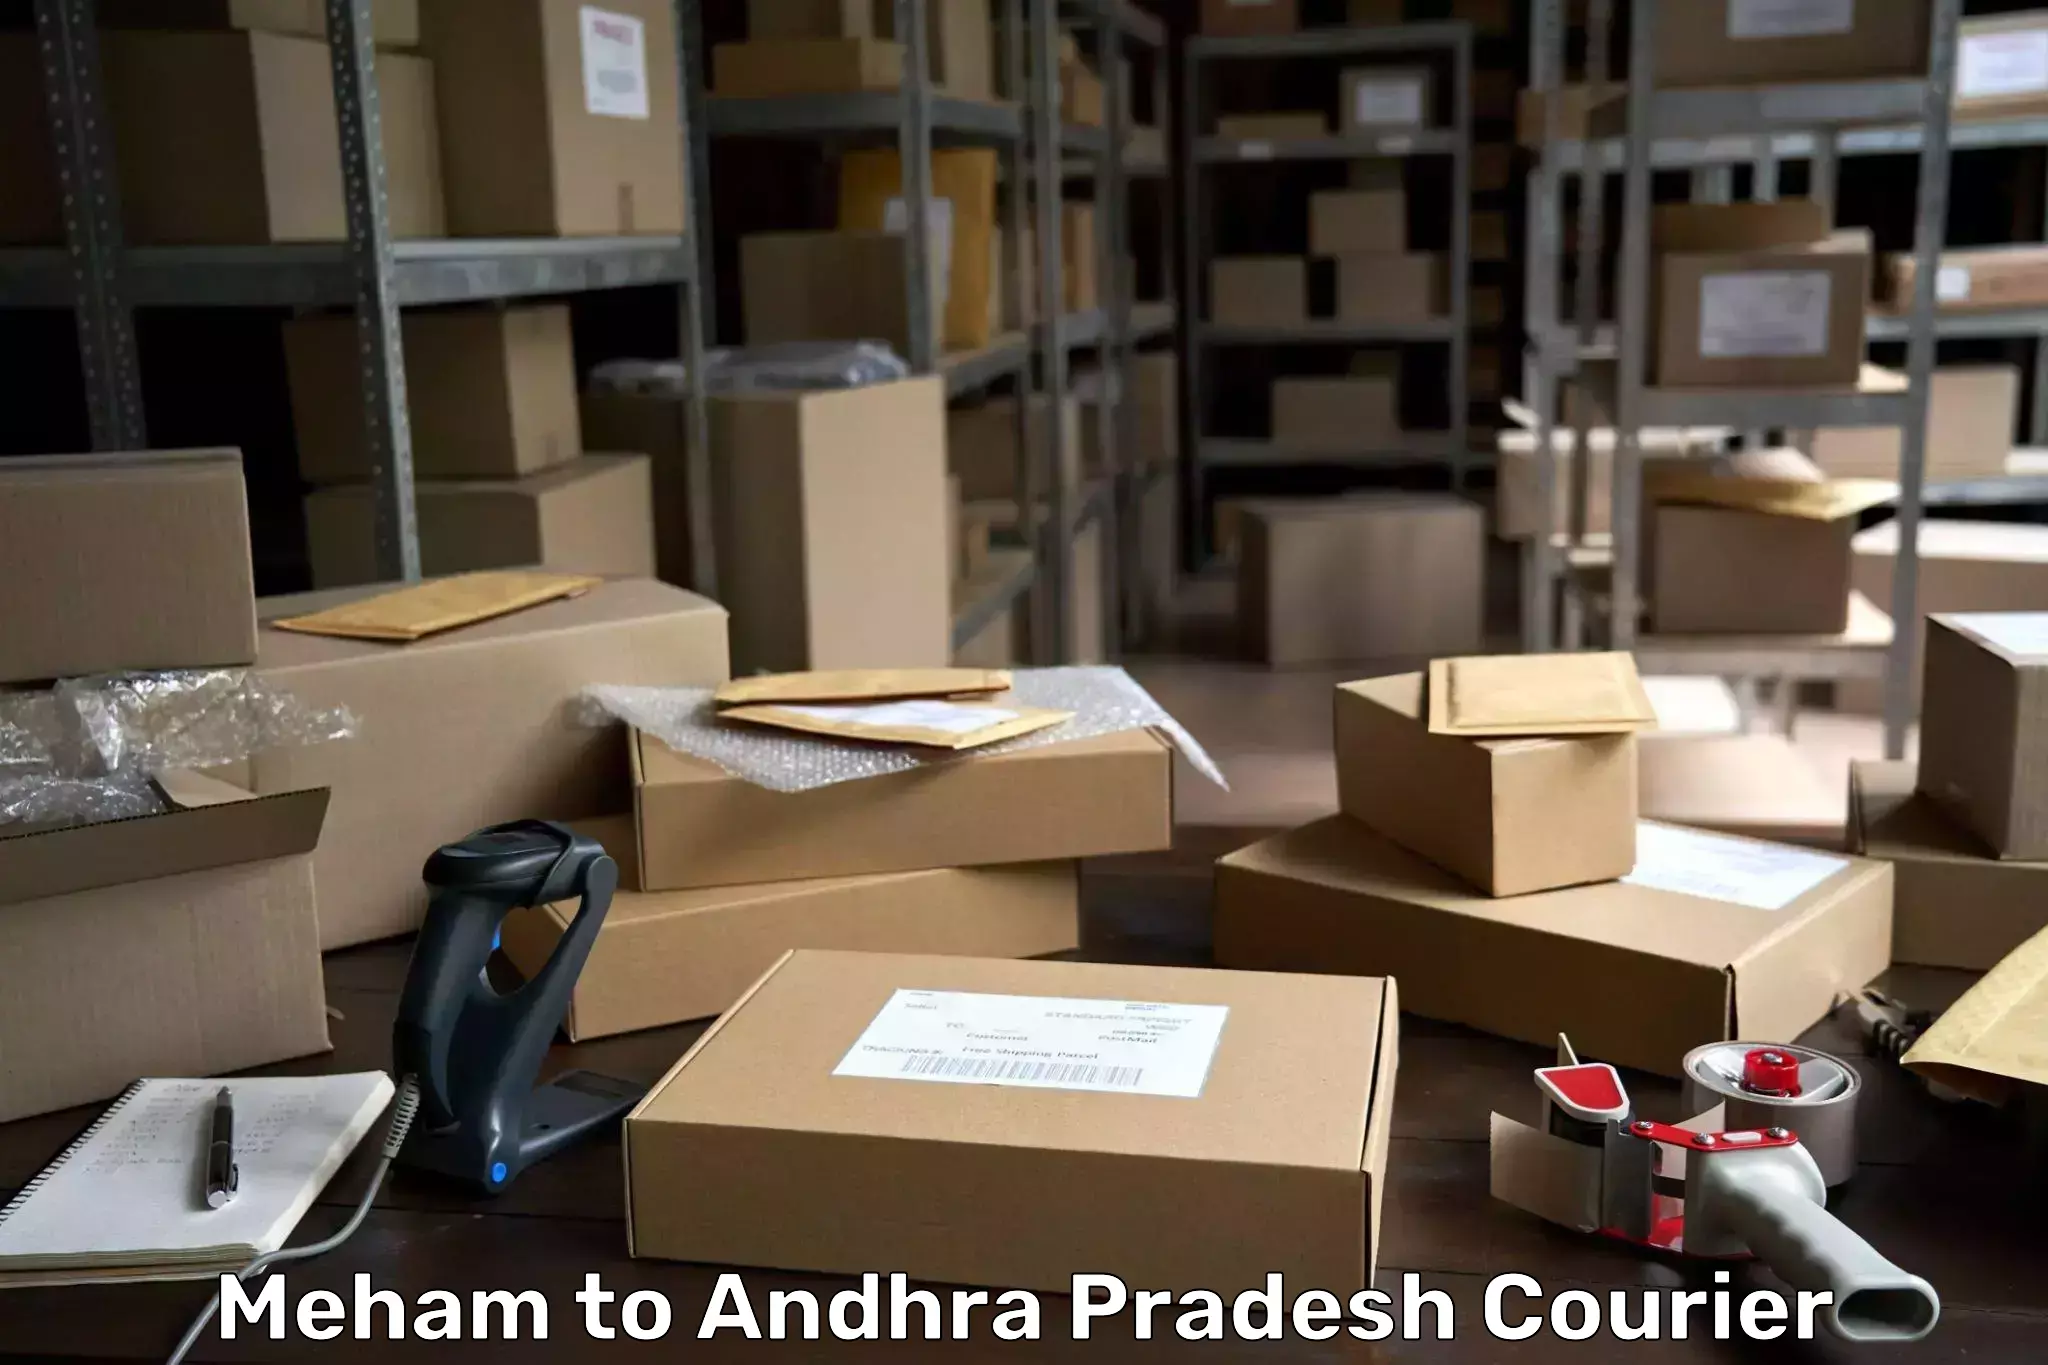 Advanced shipping services Meham to Tripuranthakam